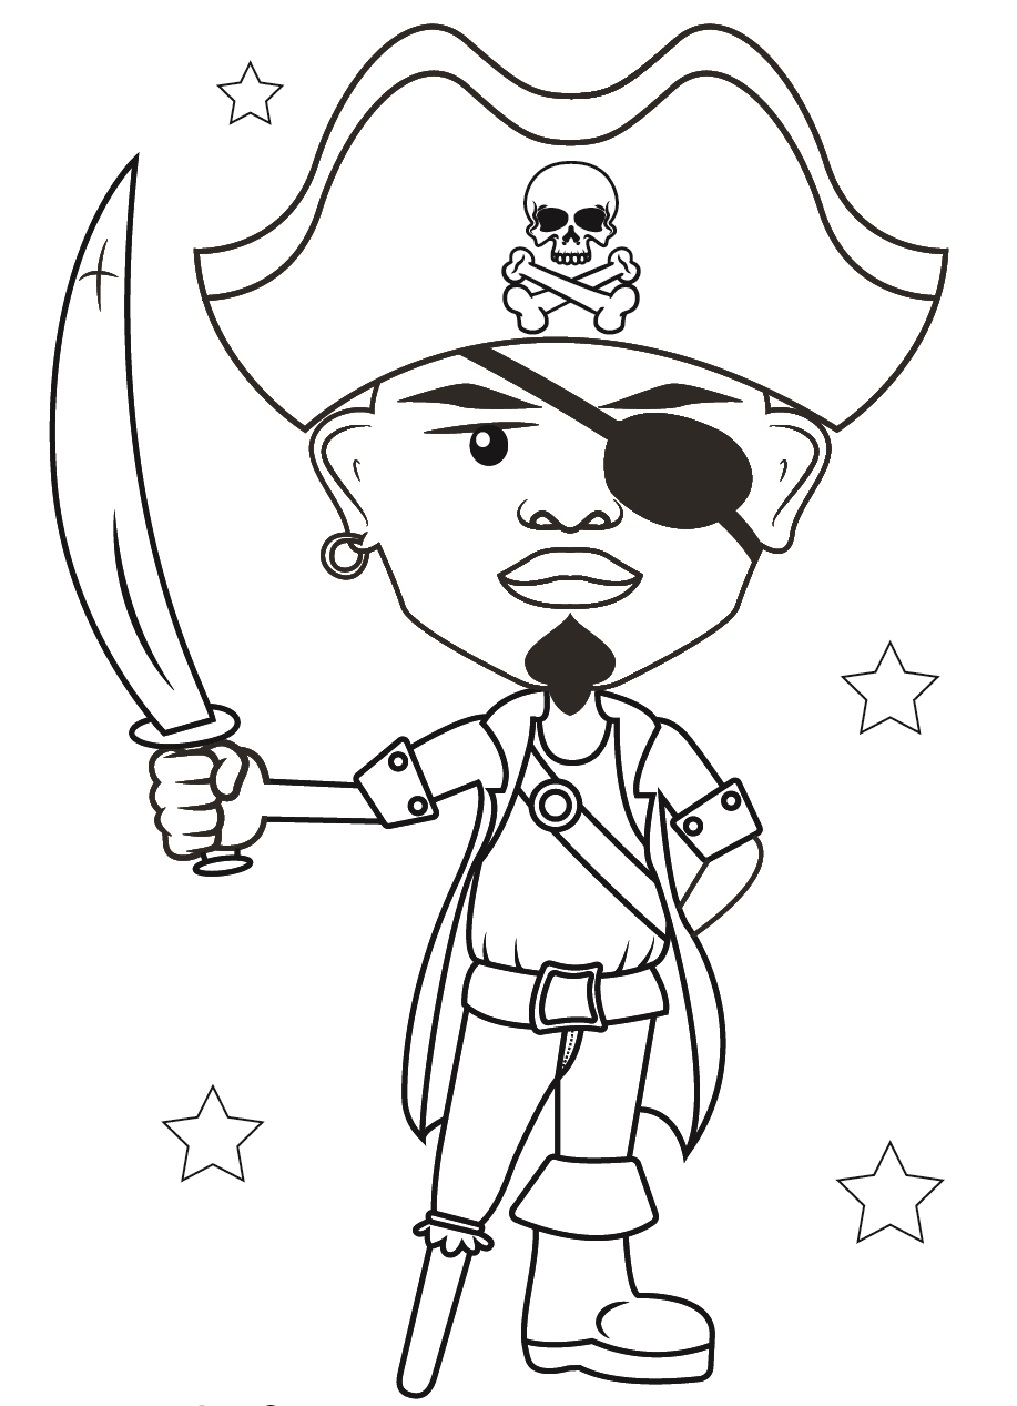 Pirate with Sword Coloring Pages for kids - SheetalColor.com